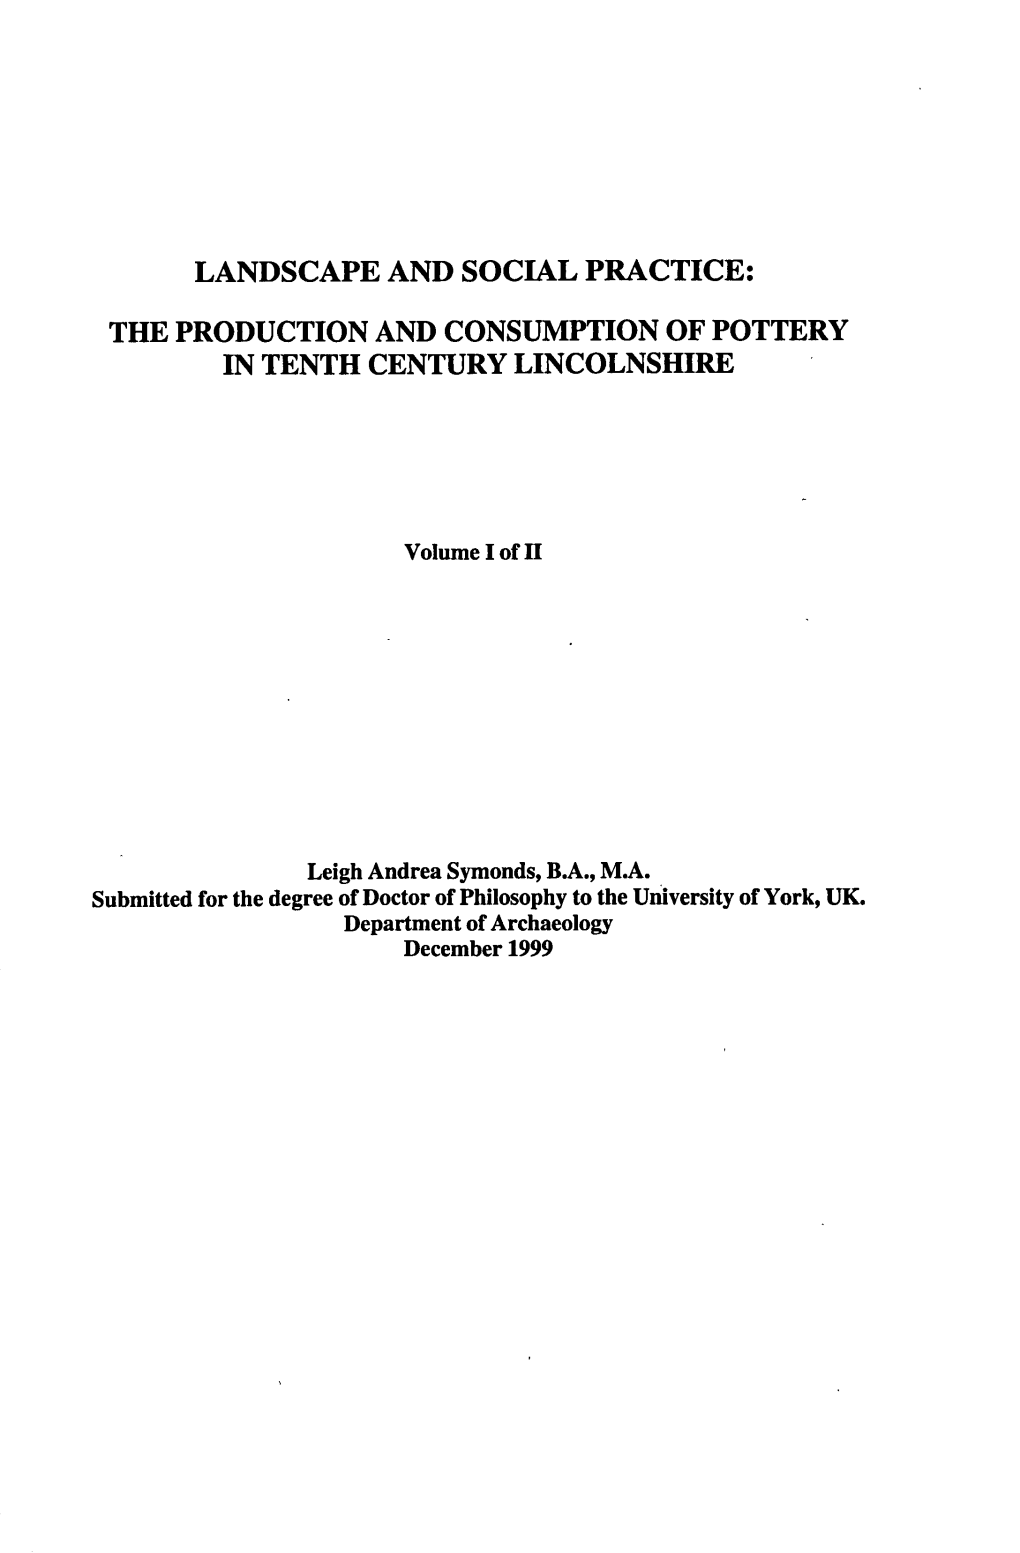 The Production and Consumption of Pottery in Tenth Century Lincolnshire